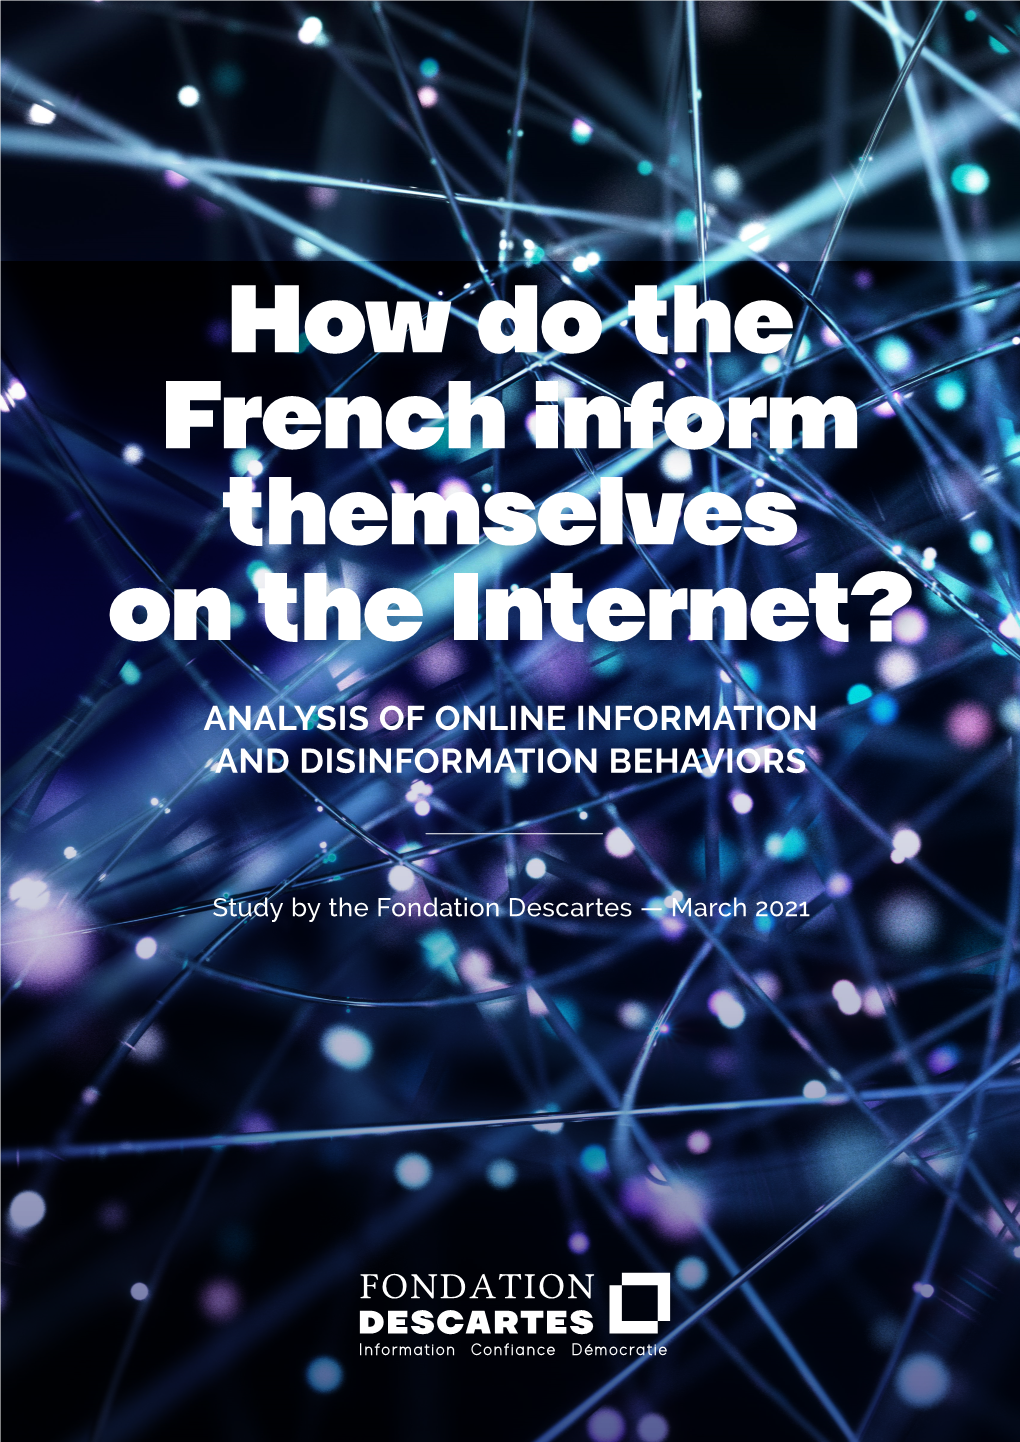 How Do the French Inform Themselves on the Internet?